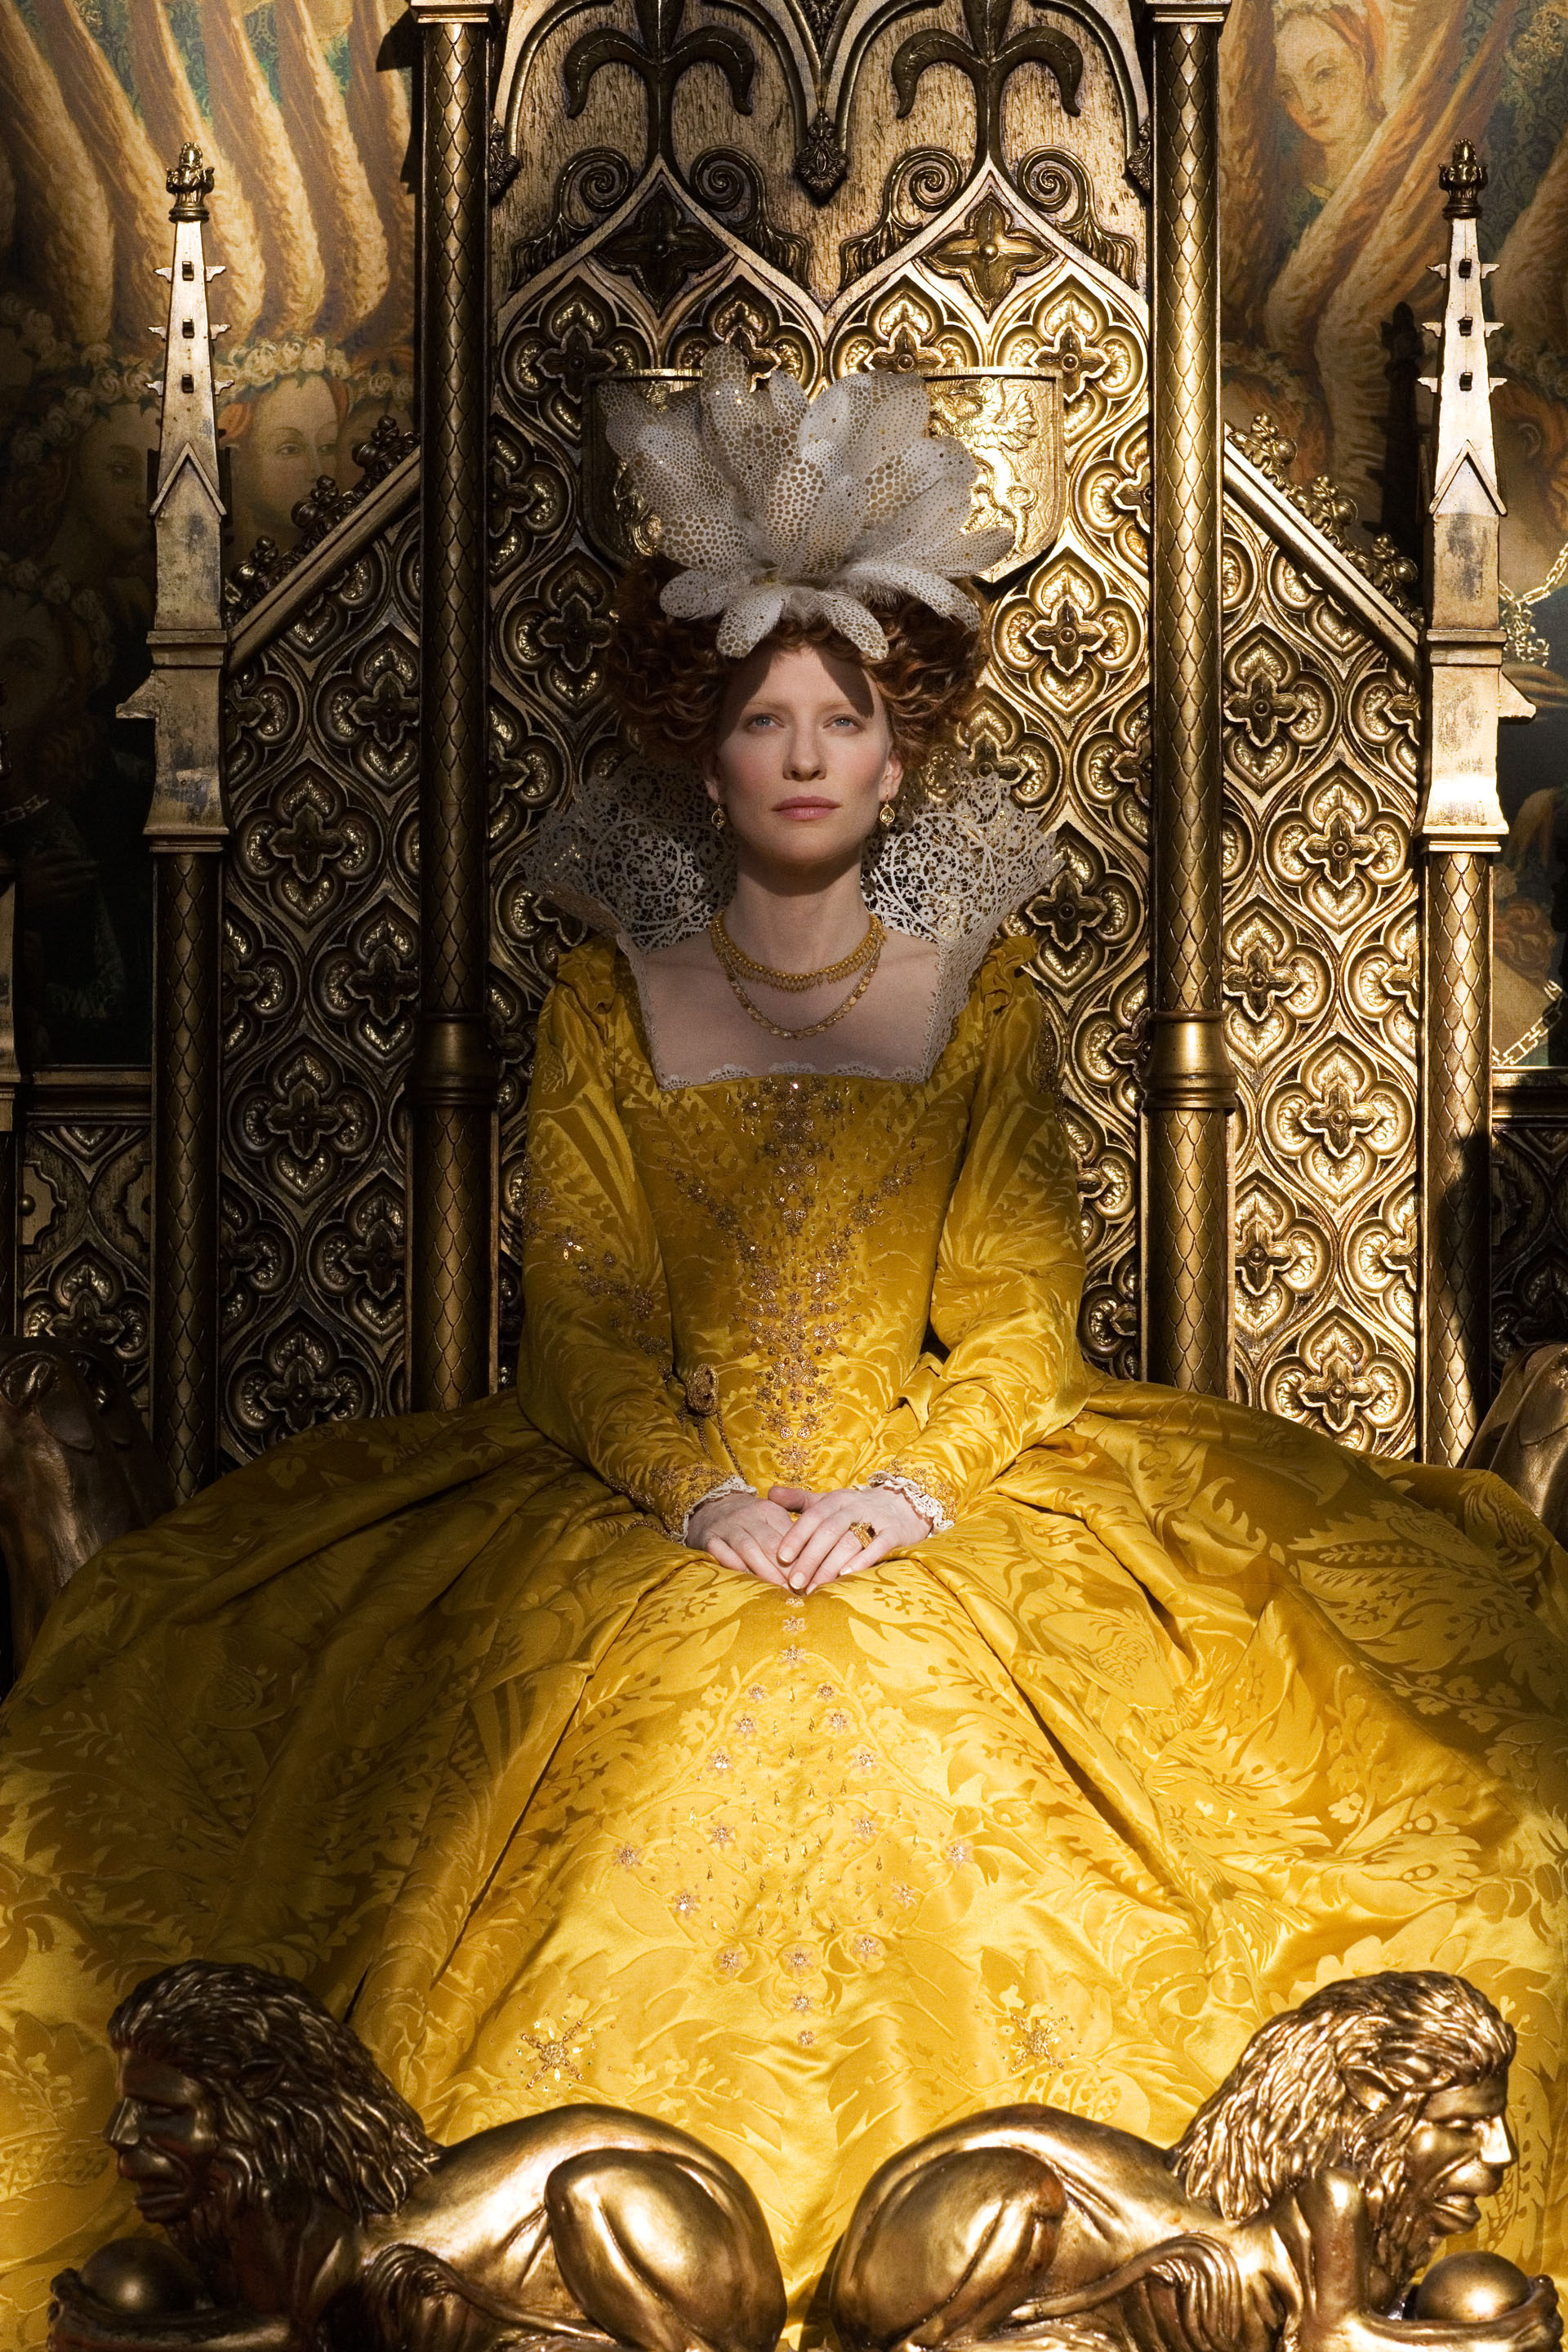 Elizabeth the Golden Age wallpapers, movie HQ, pictures 4k, 2019, 1920x2880 HD Phone